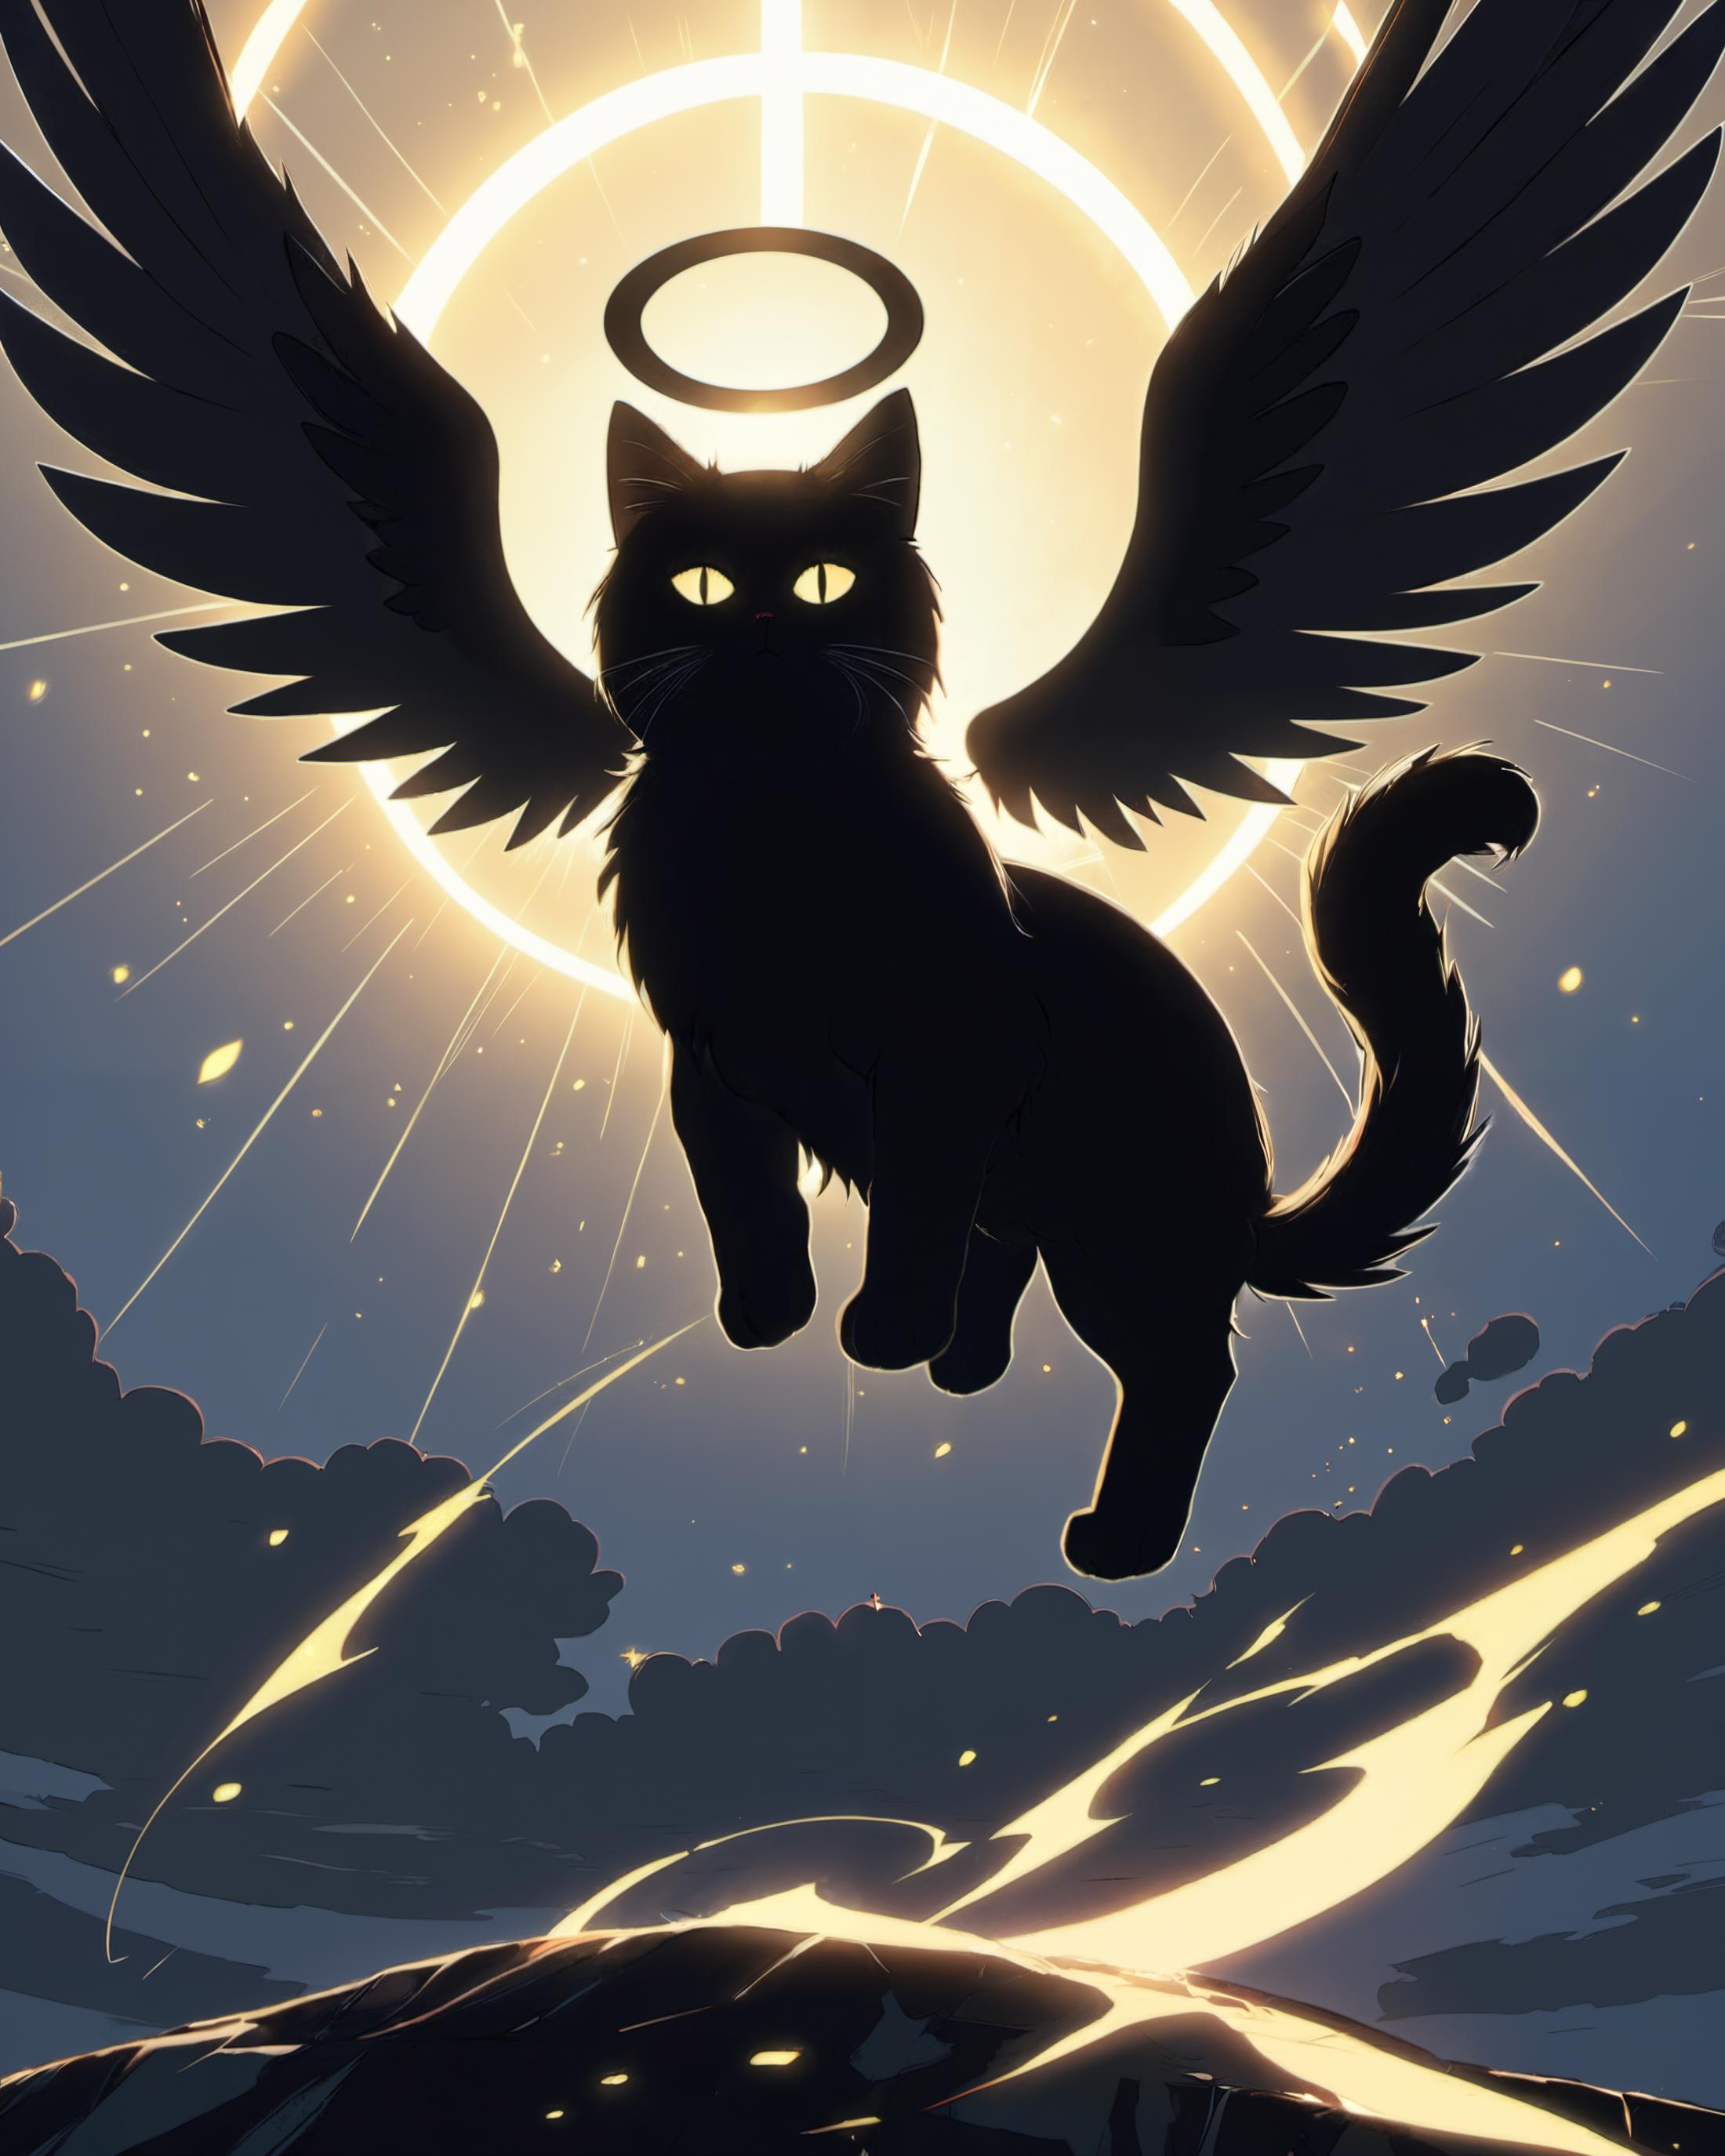 A Black Cat with Wings and an Angel Halo Flying in the Sky